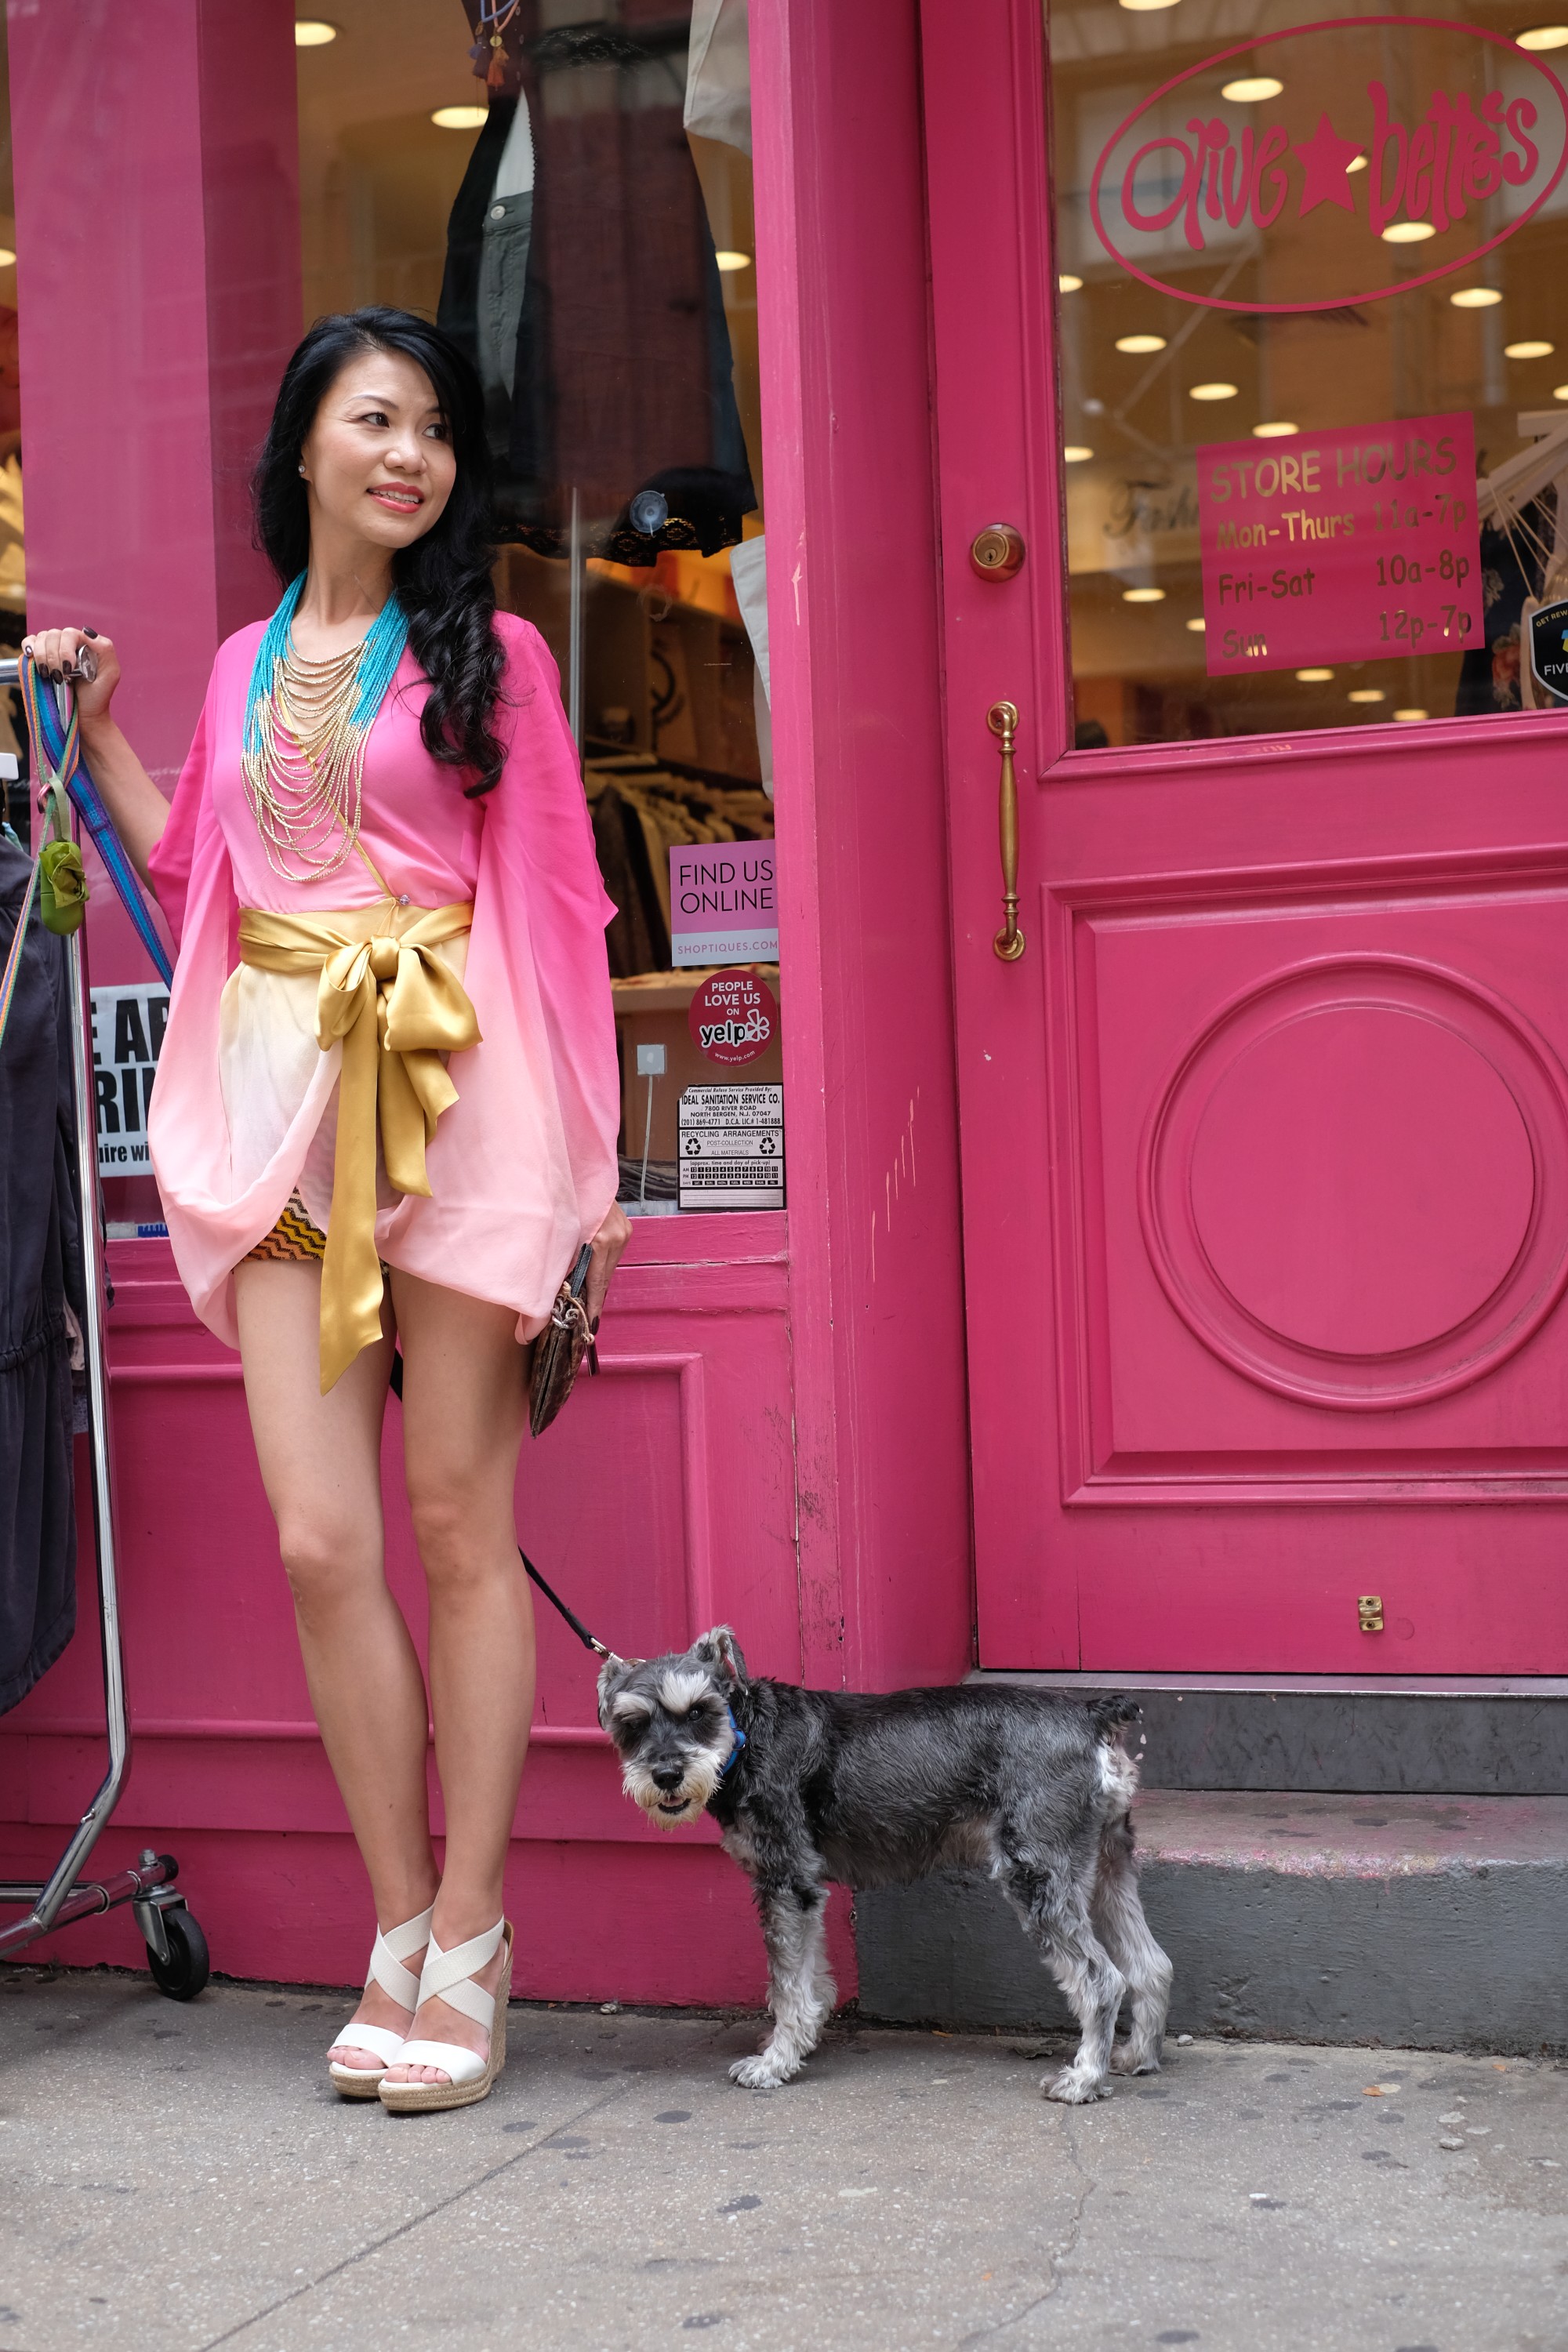 pretty girl in pink outfit with dog